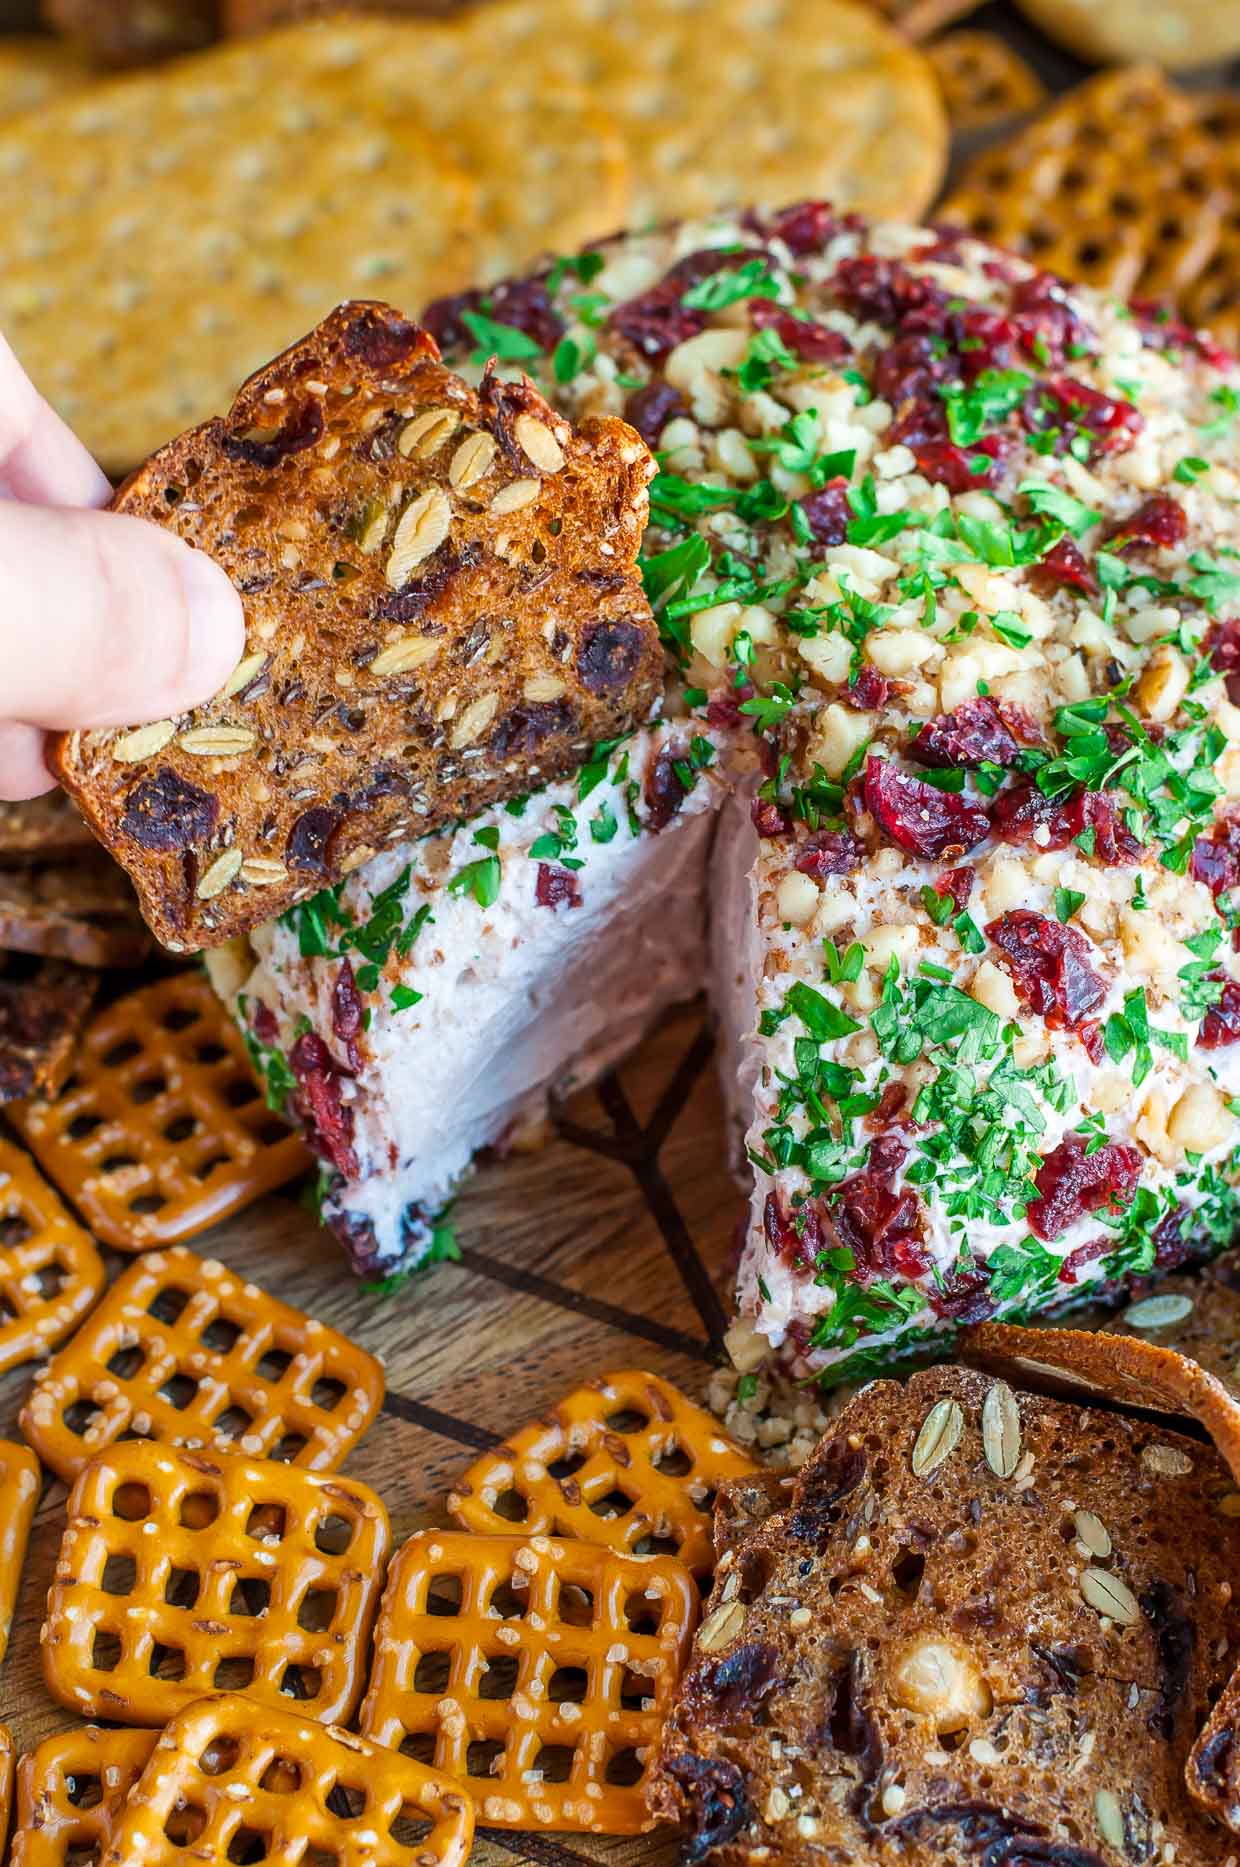 Snag some leftover cranberry sauce and swirl it into this super luxe cranberry walnut holiday cheese ball! Kick it up a notch with sprinkle of cinnamon, a drizzle of honey, and a whole lot of flavor!